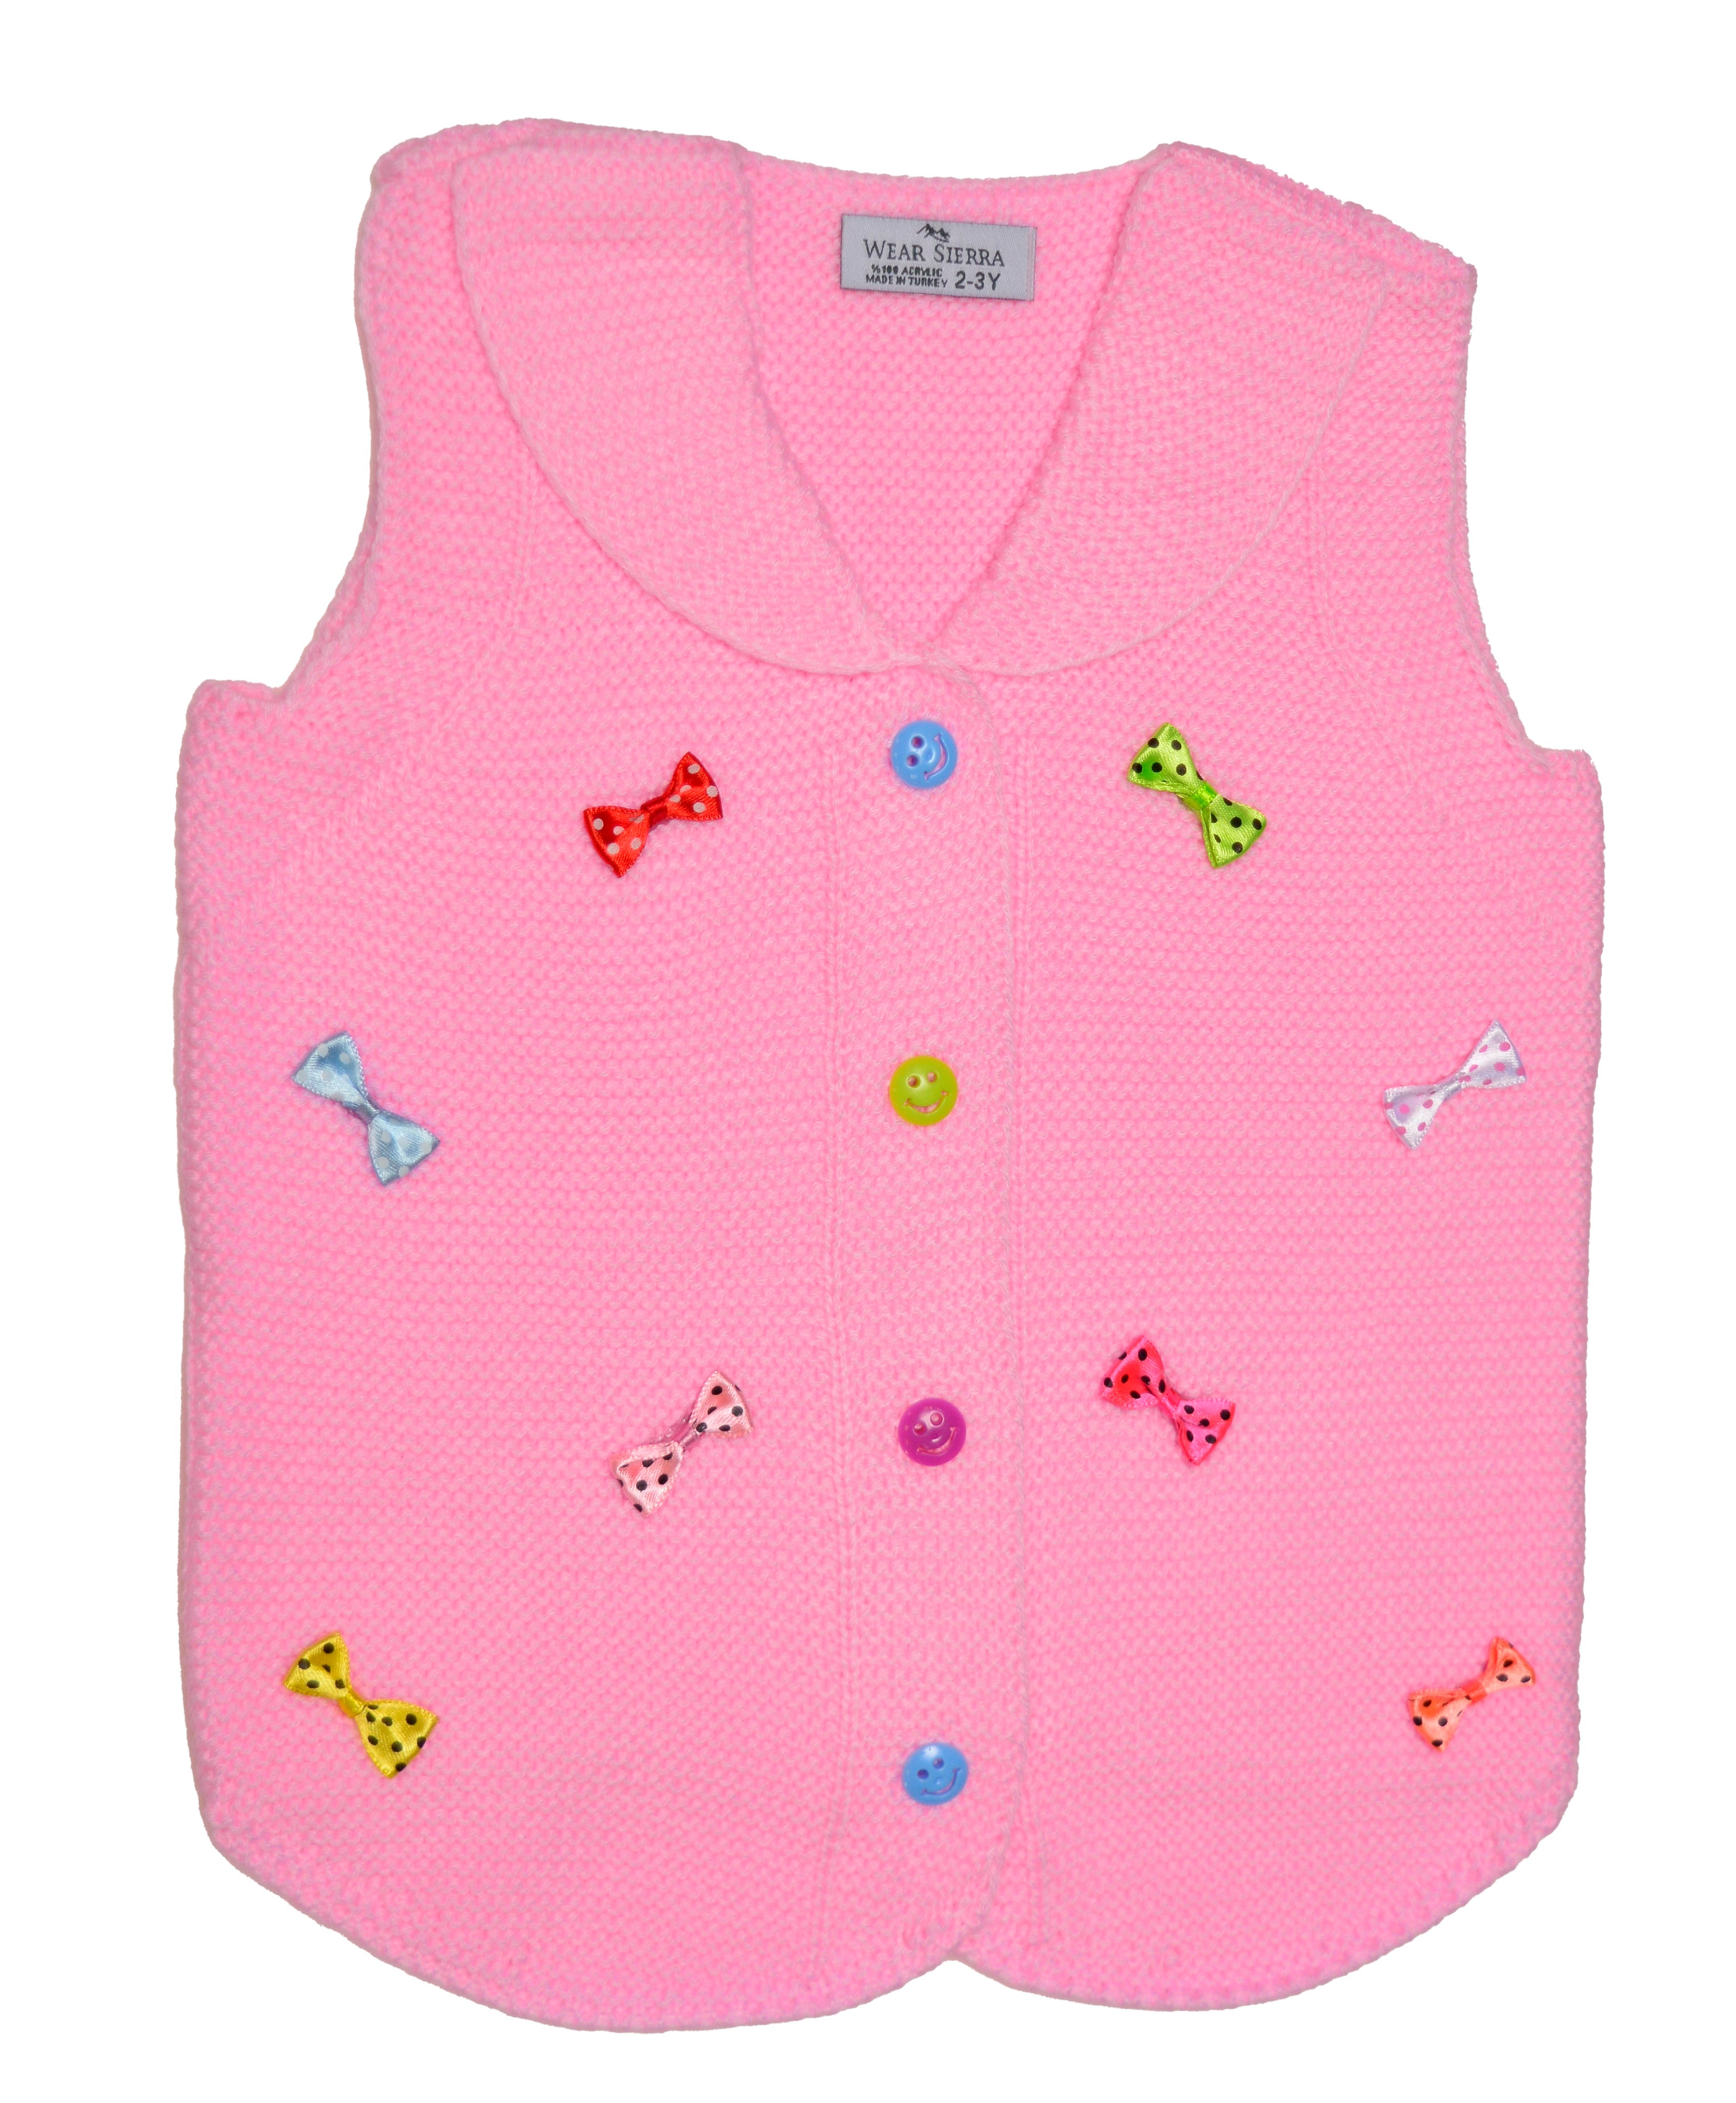 Sweater Vest For Infants and Toddlers - Cute Bear Design Cardigan for  Little Kids